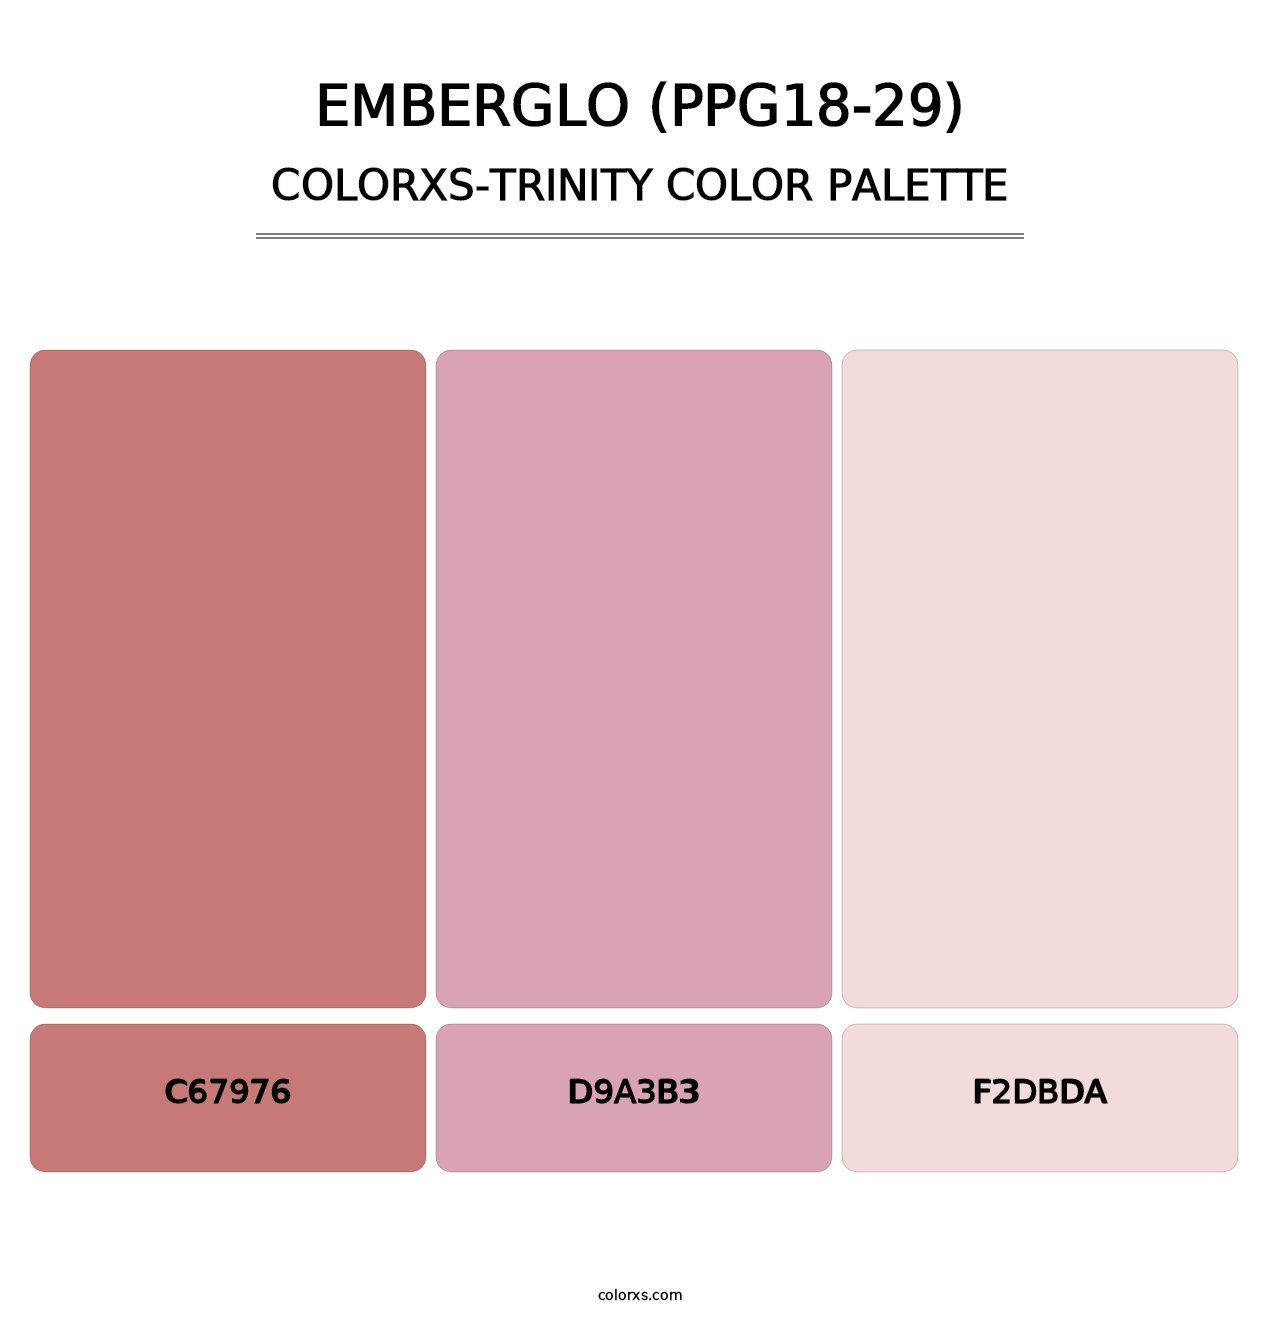 Emberglo (PPG18-29) - Colorxs Trinity Palette